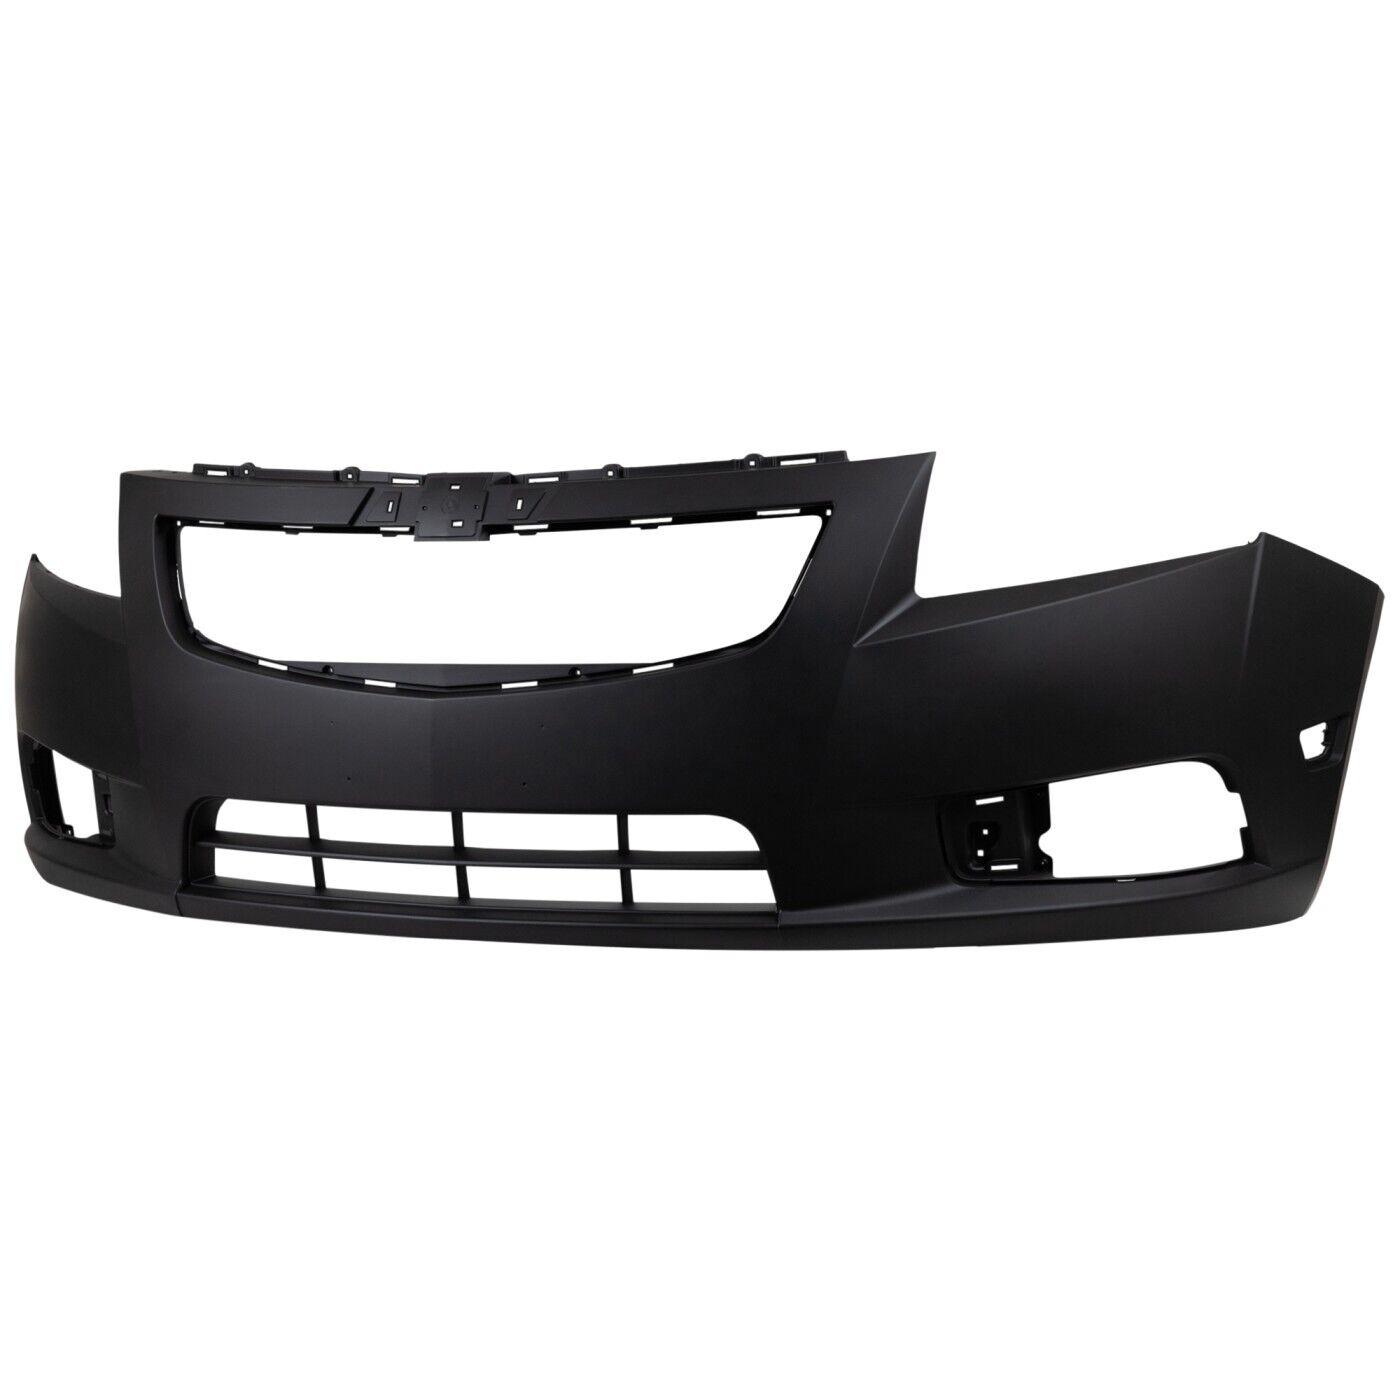 Front Bumper Cover For 2011-2014 Chevrolet Cruze Primed With Fog Light Holes